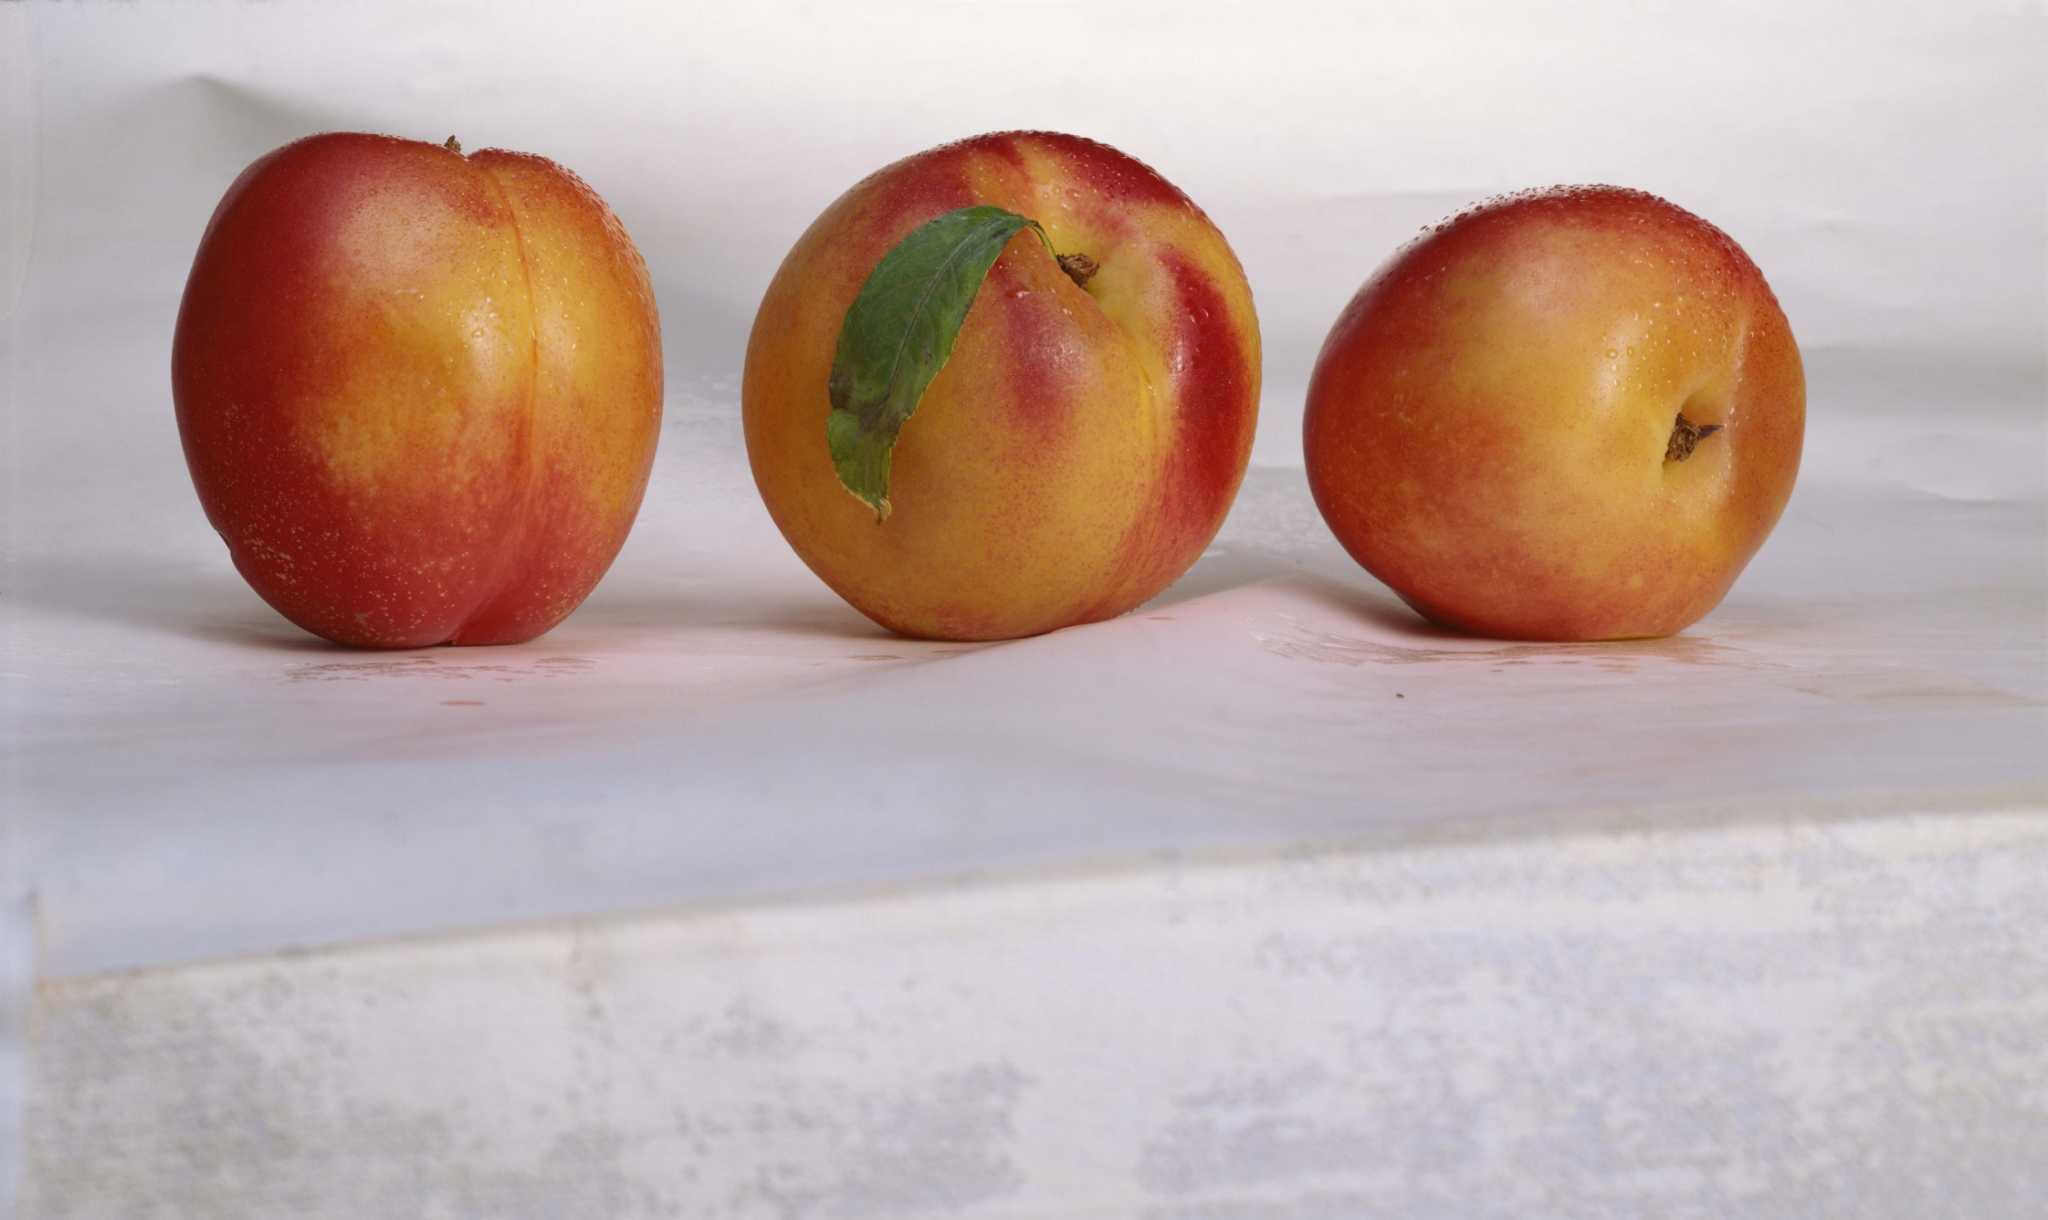 Growing Peaches and Nectarines in the Home Landscape